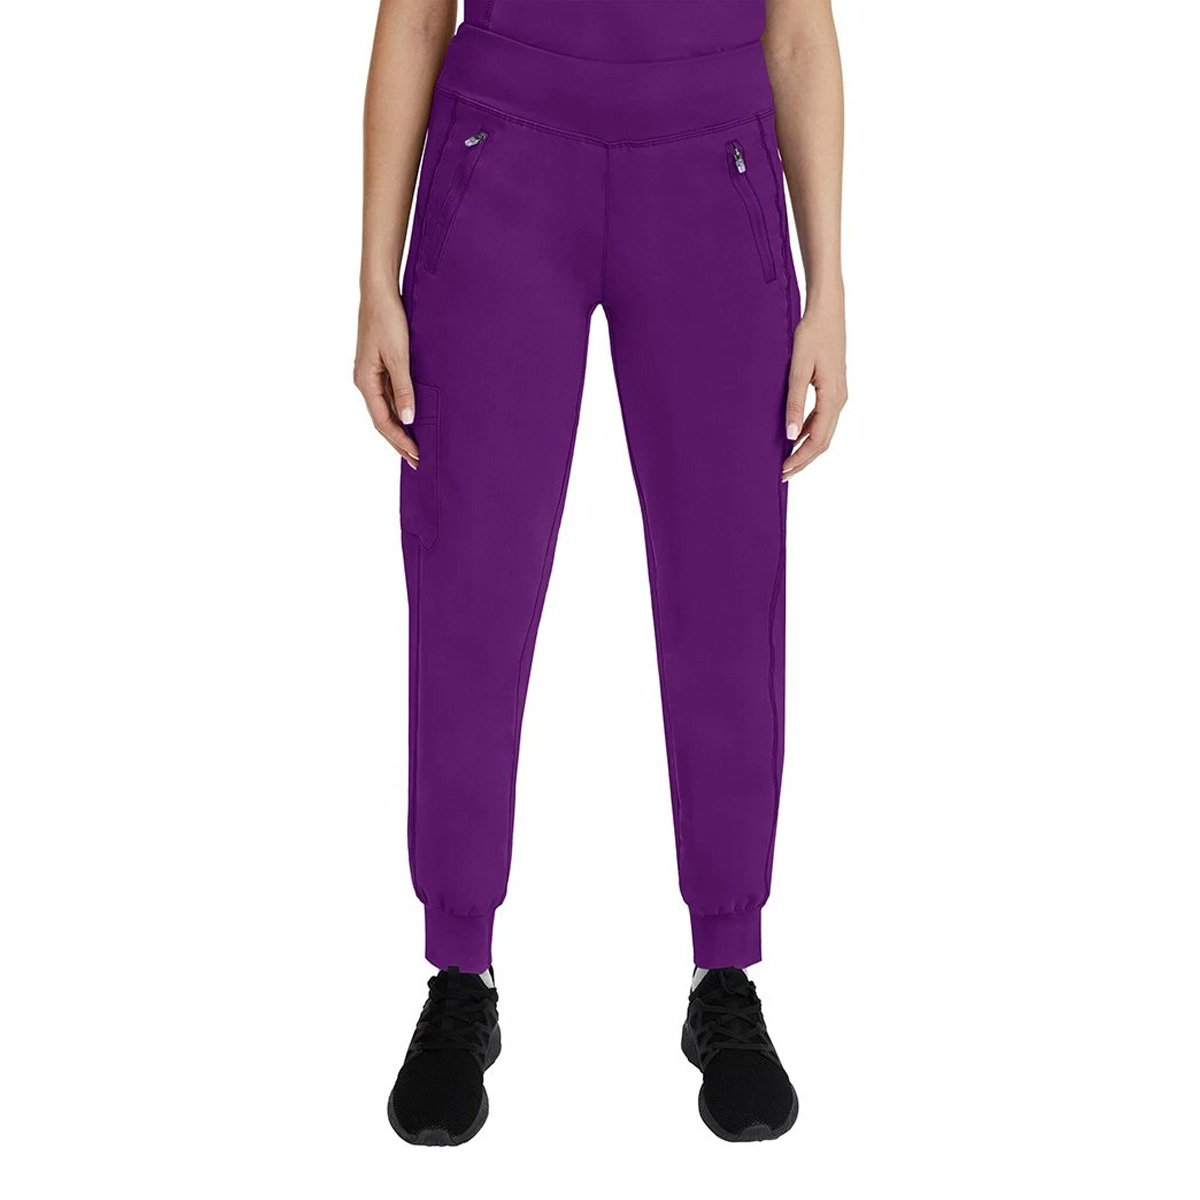 adviicd Sport Tummy Control 100% Cotton Yoga Pants for Women Casual Running  Tight Trouser Healing Hands Purple Label Scrubs Yoga Pants Workout Leggings  